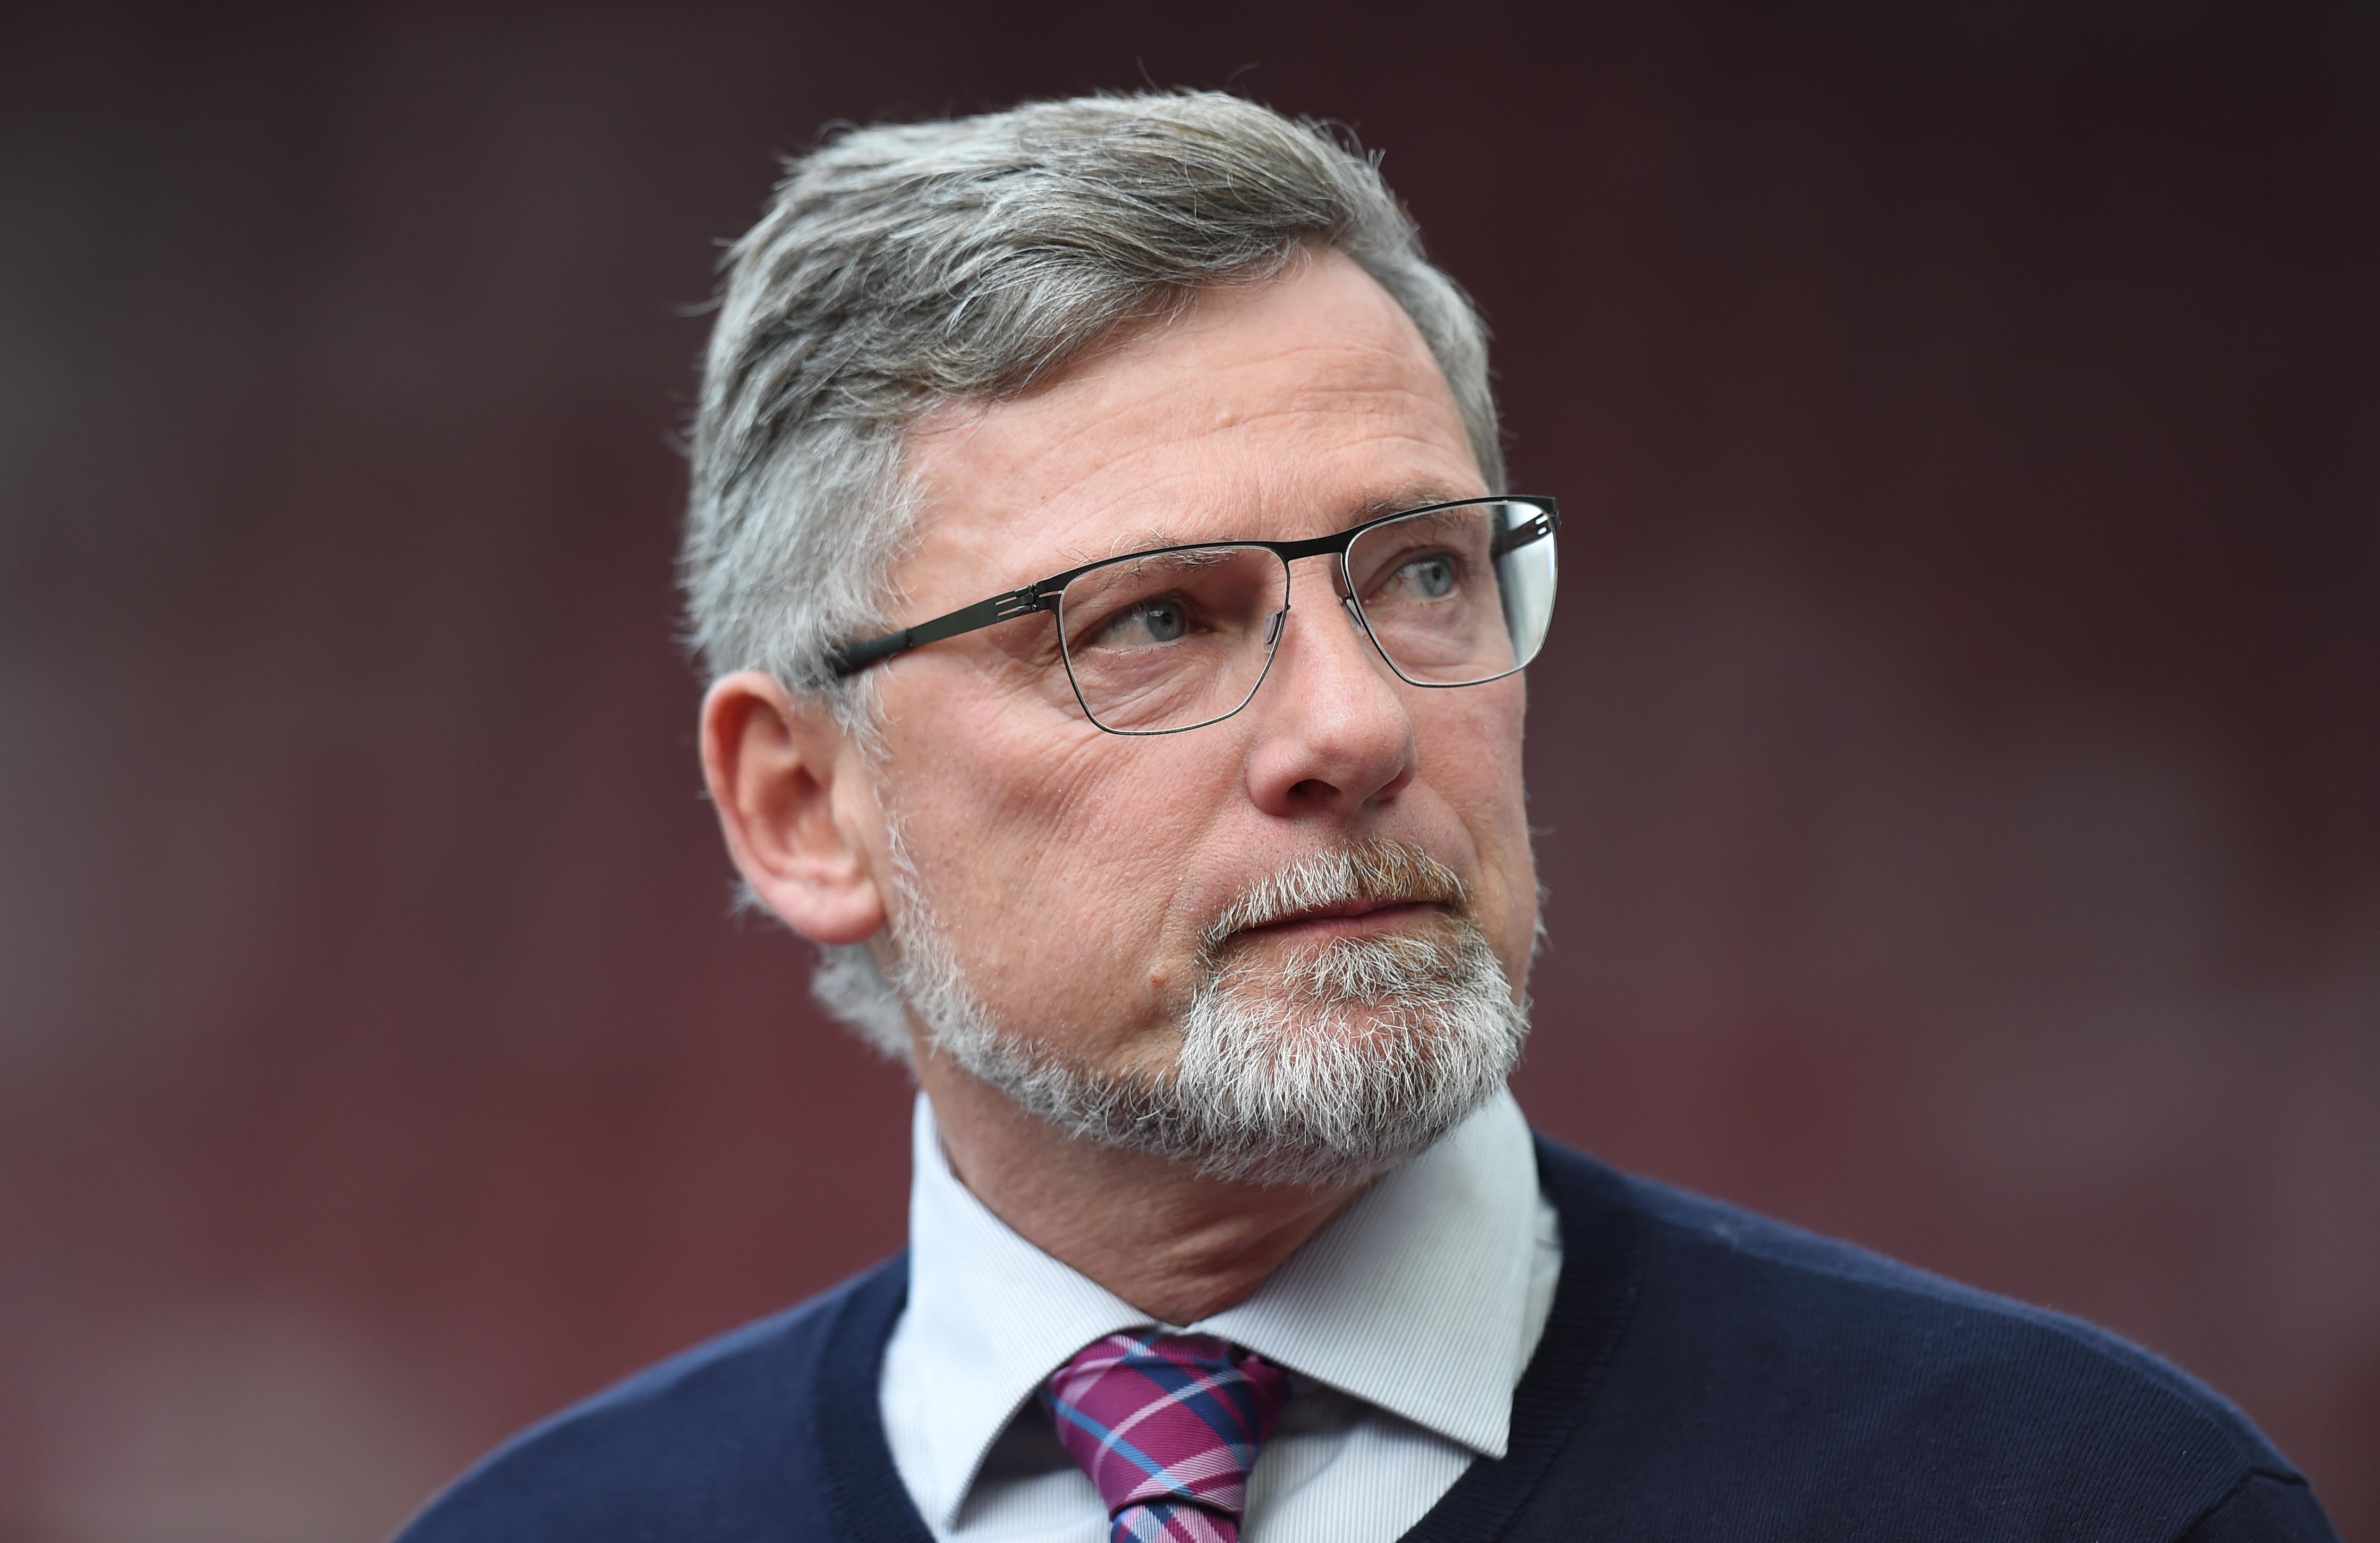 Craig Levein announced as new St Johnstone manager